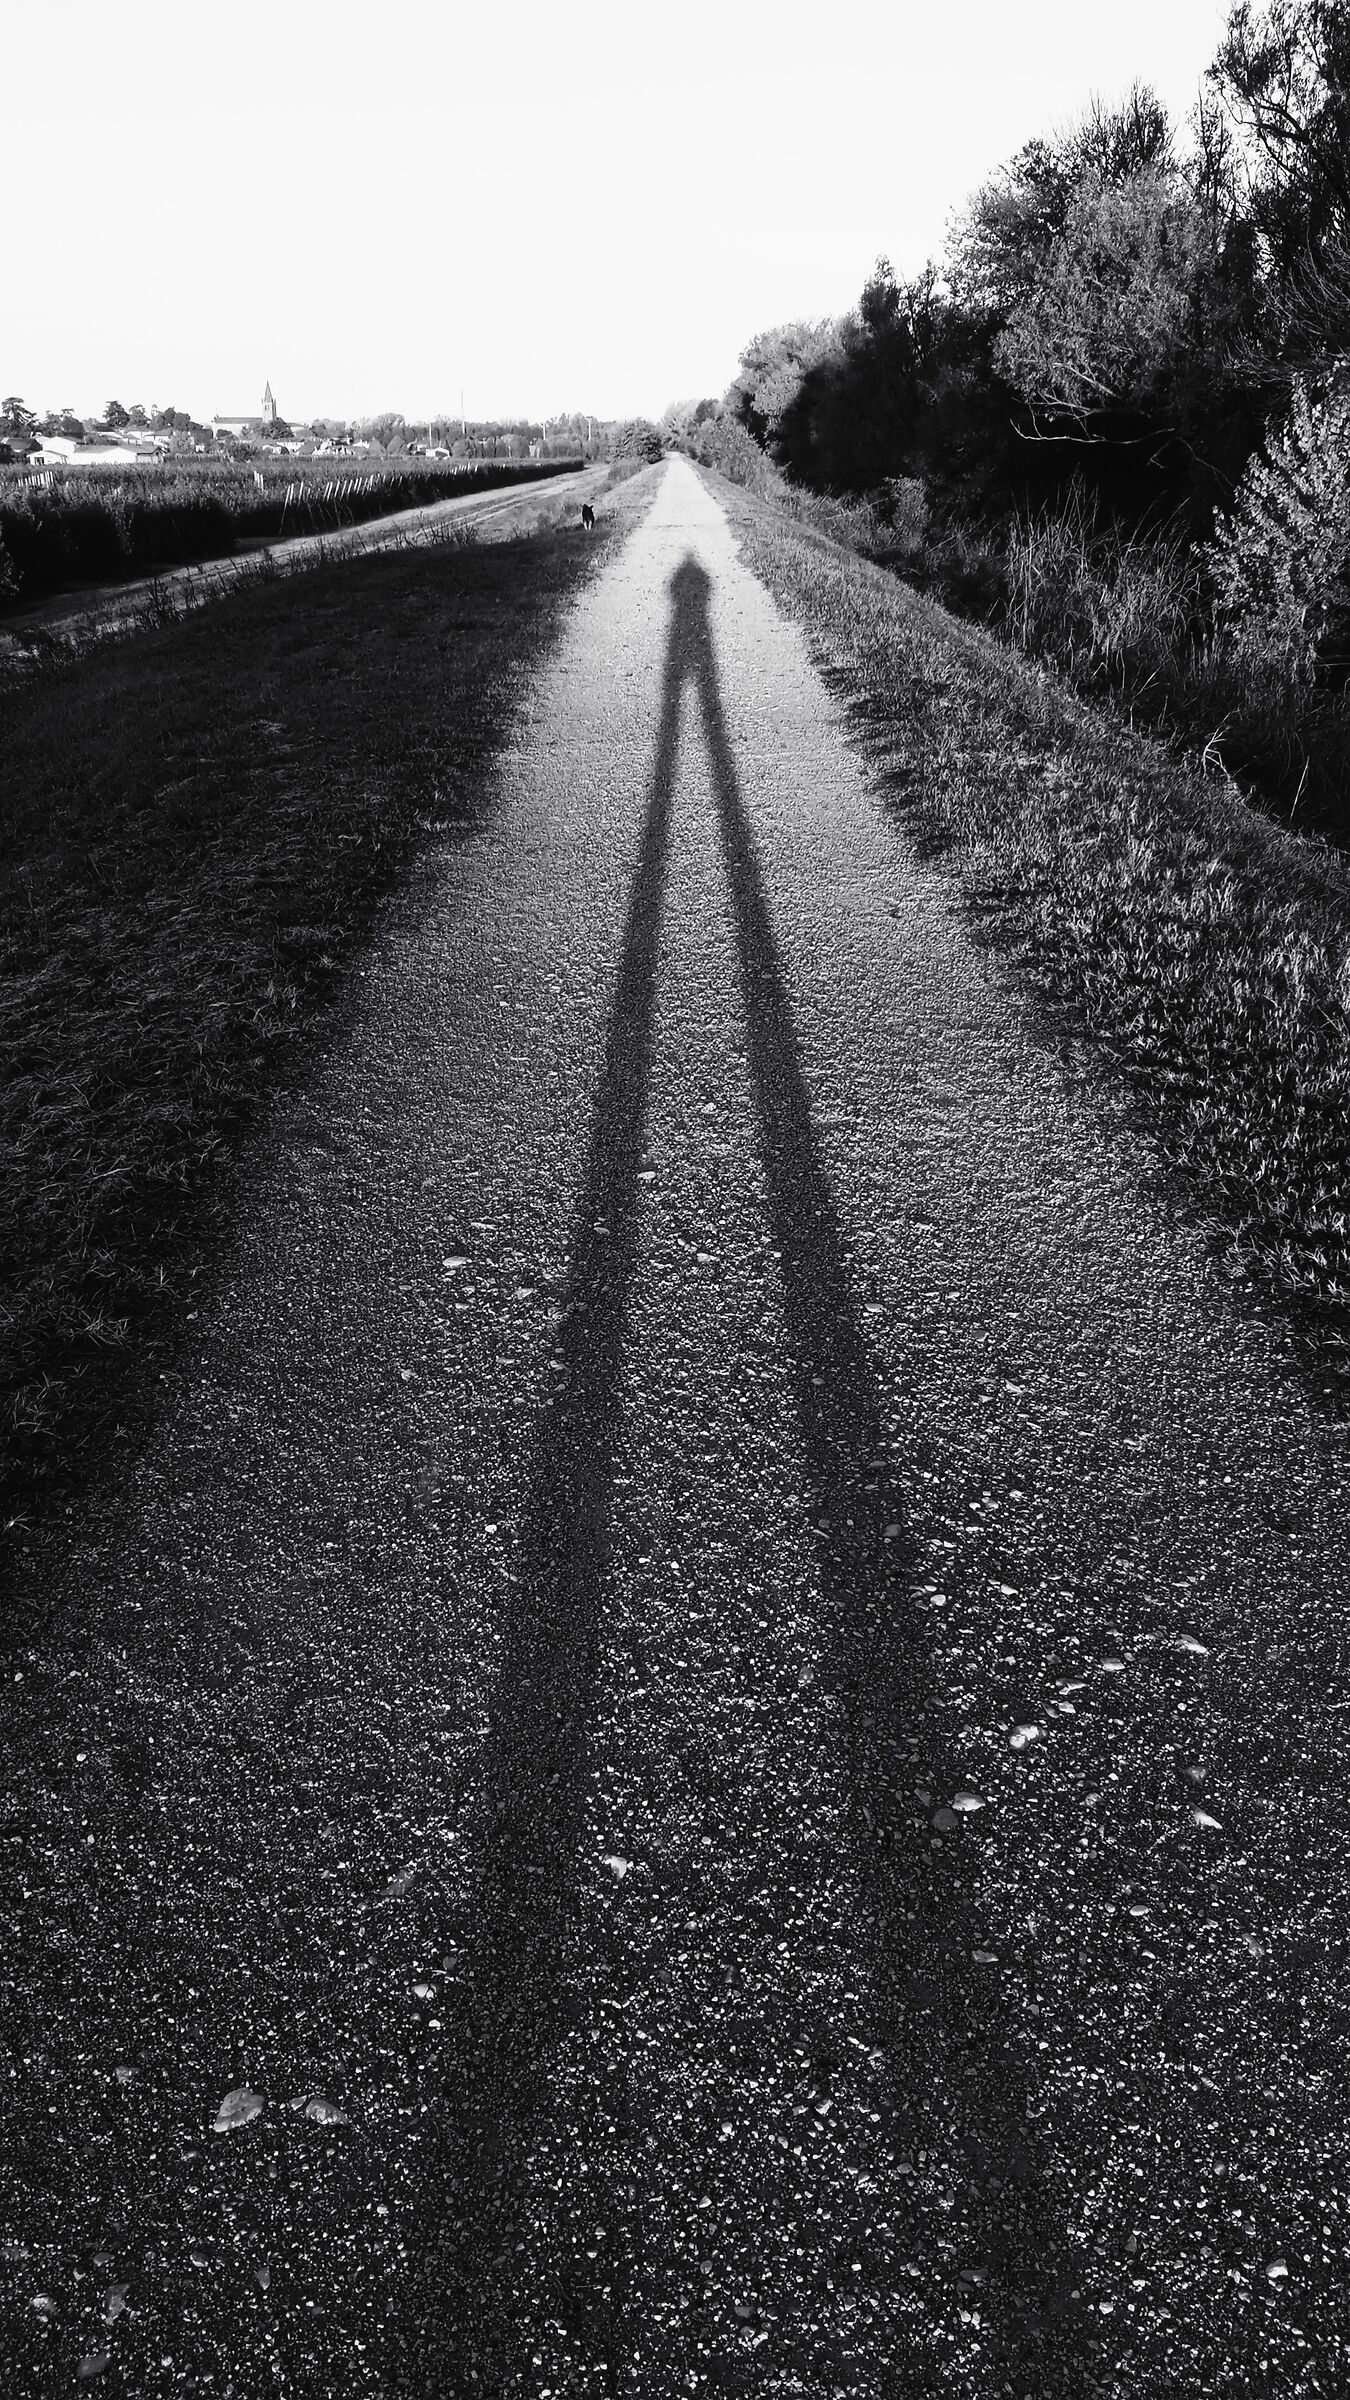 Long shadows in the morning...